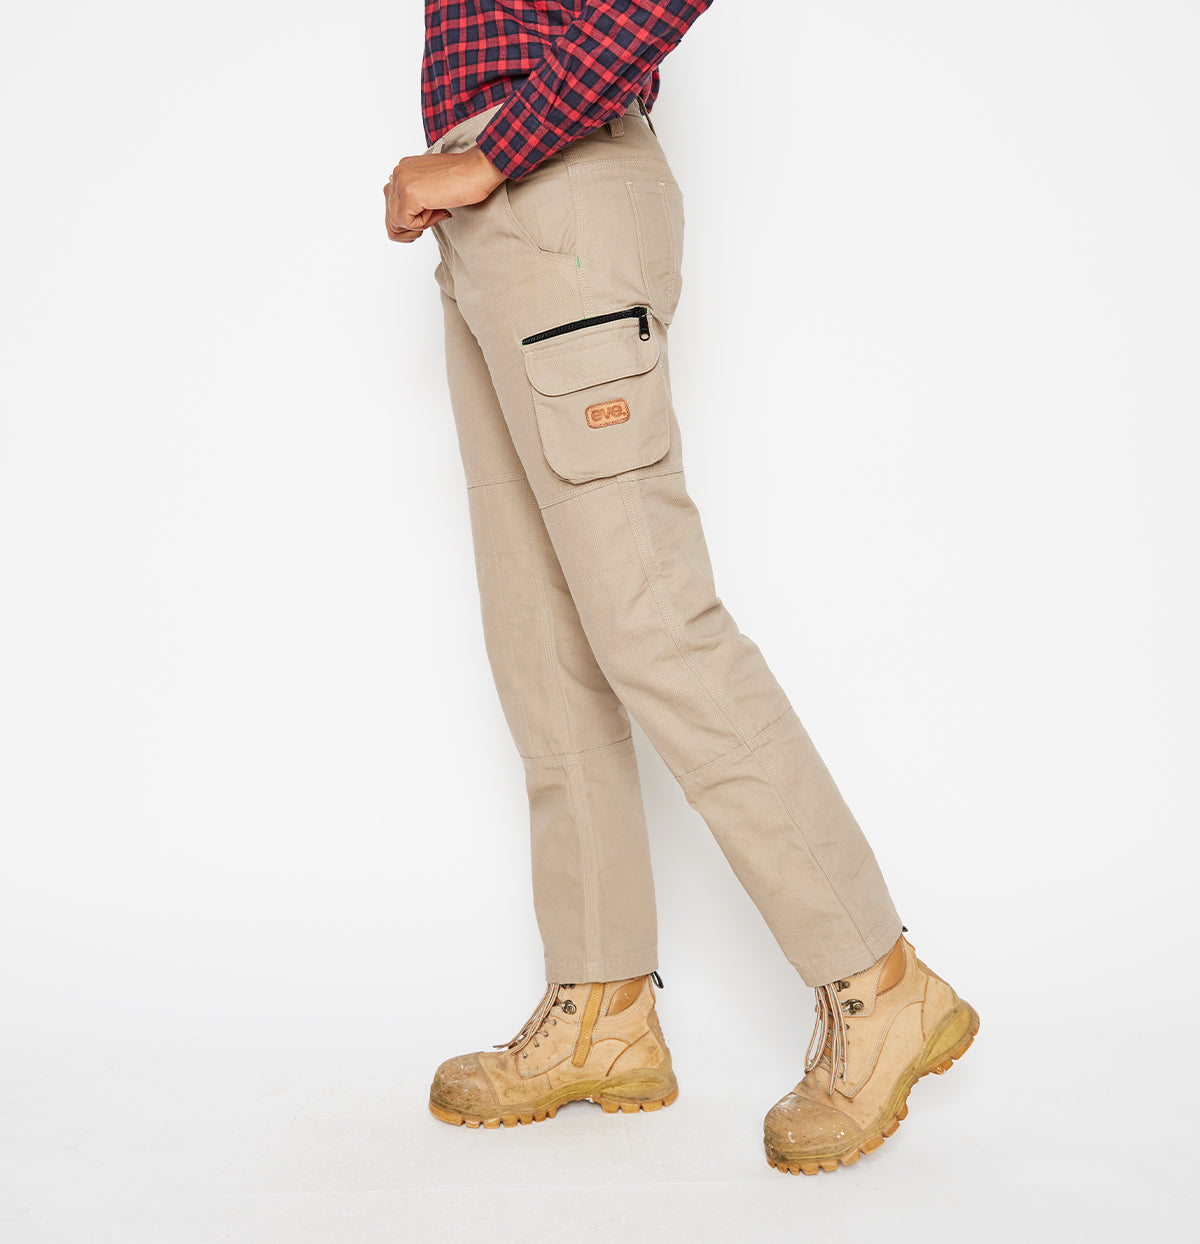 Strong Mid Rise Heavy Duty Pants